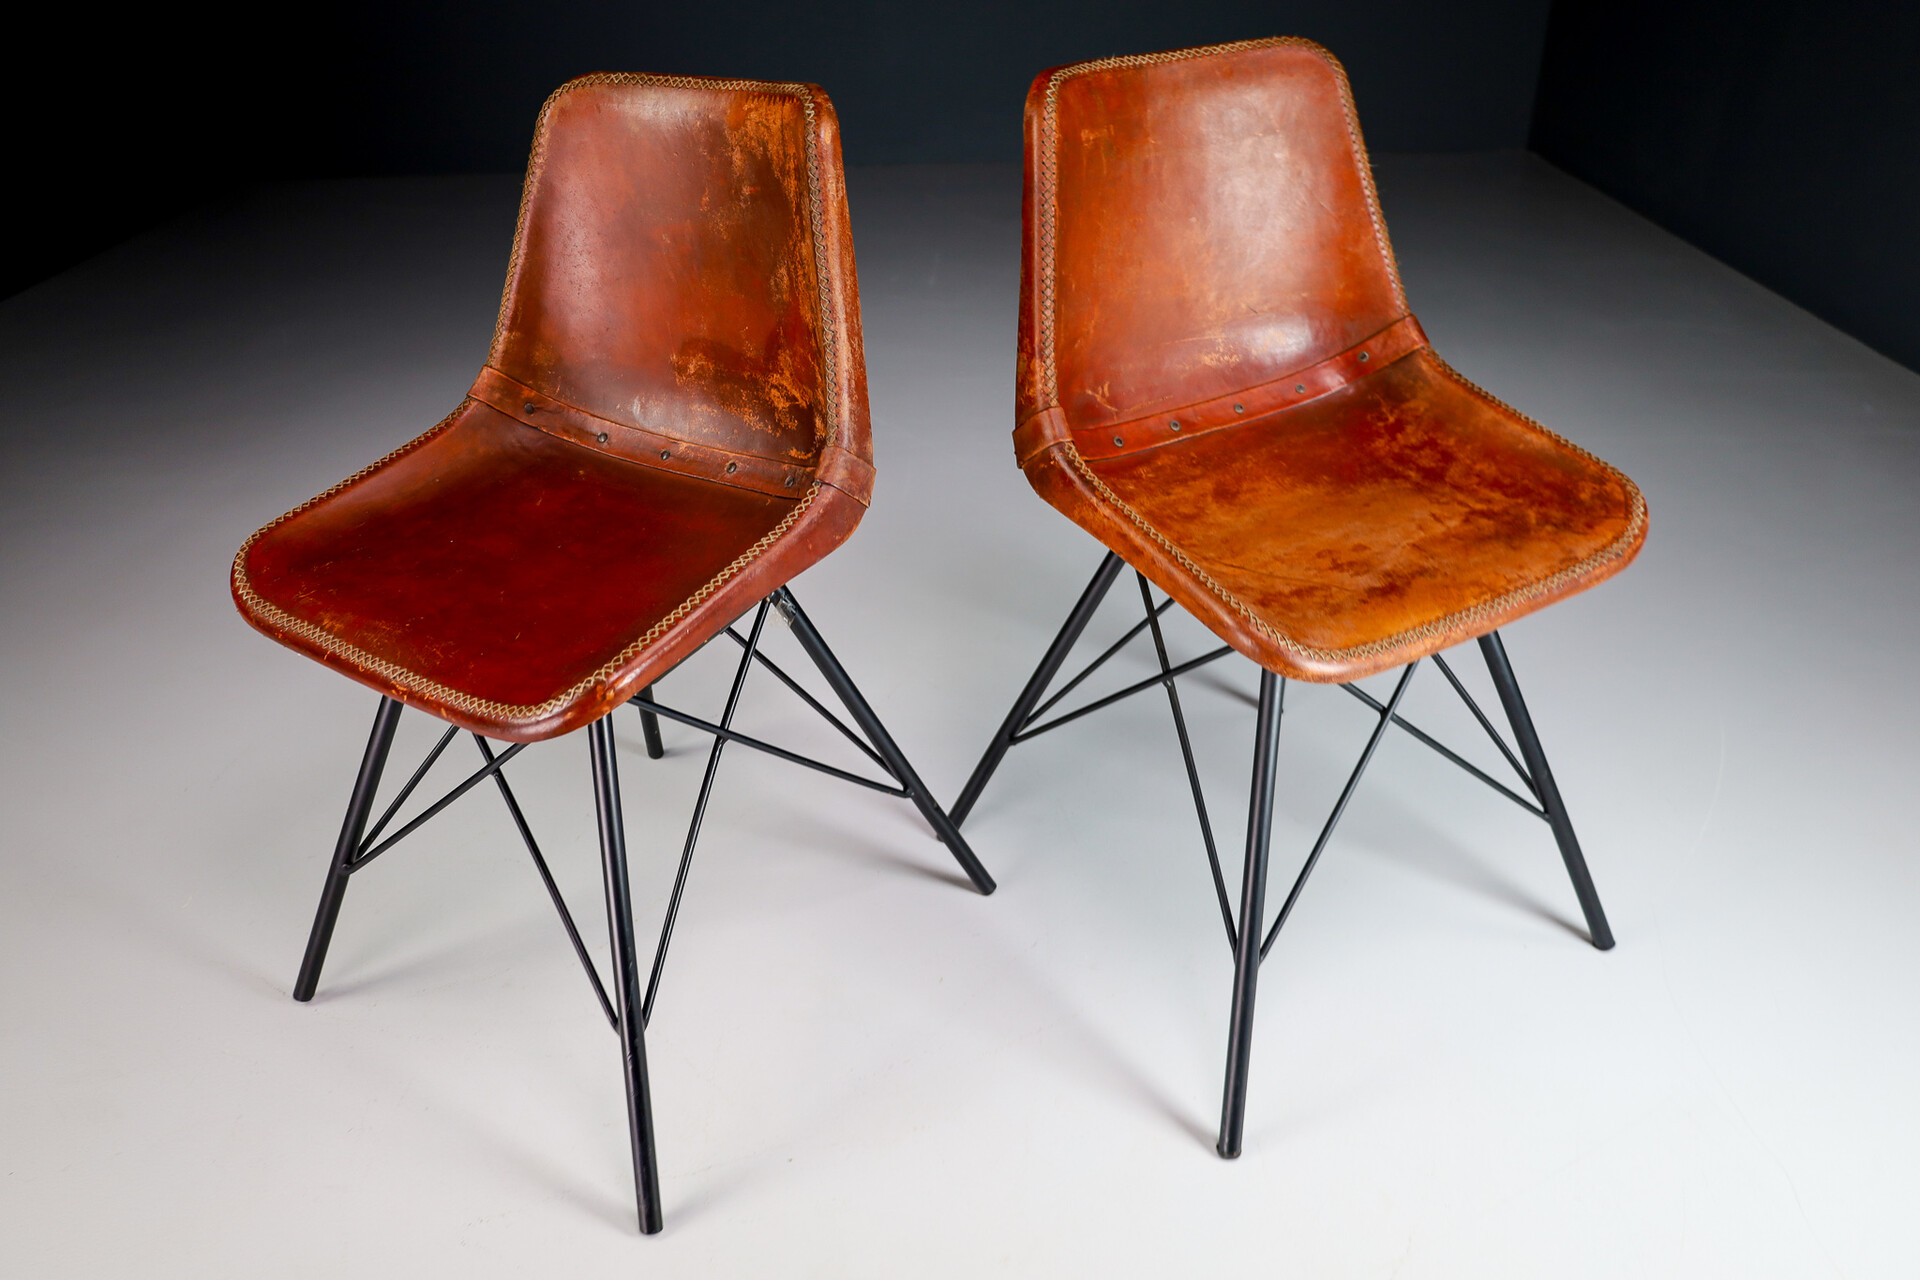 Charlotte Perriand, Les Arcs chairs, Mid century modern